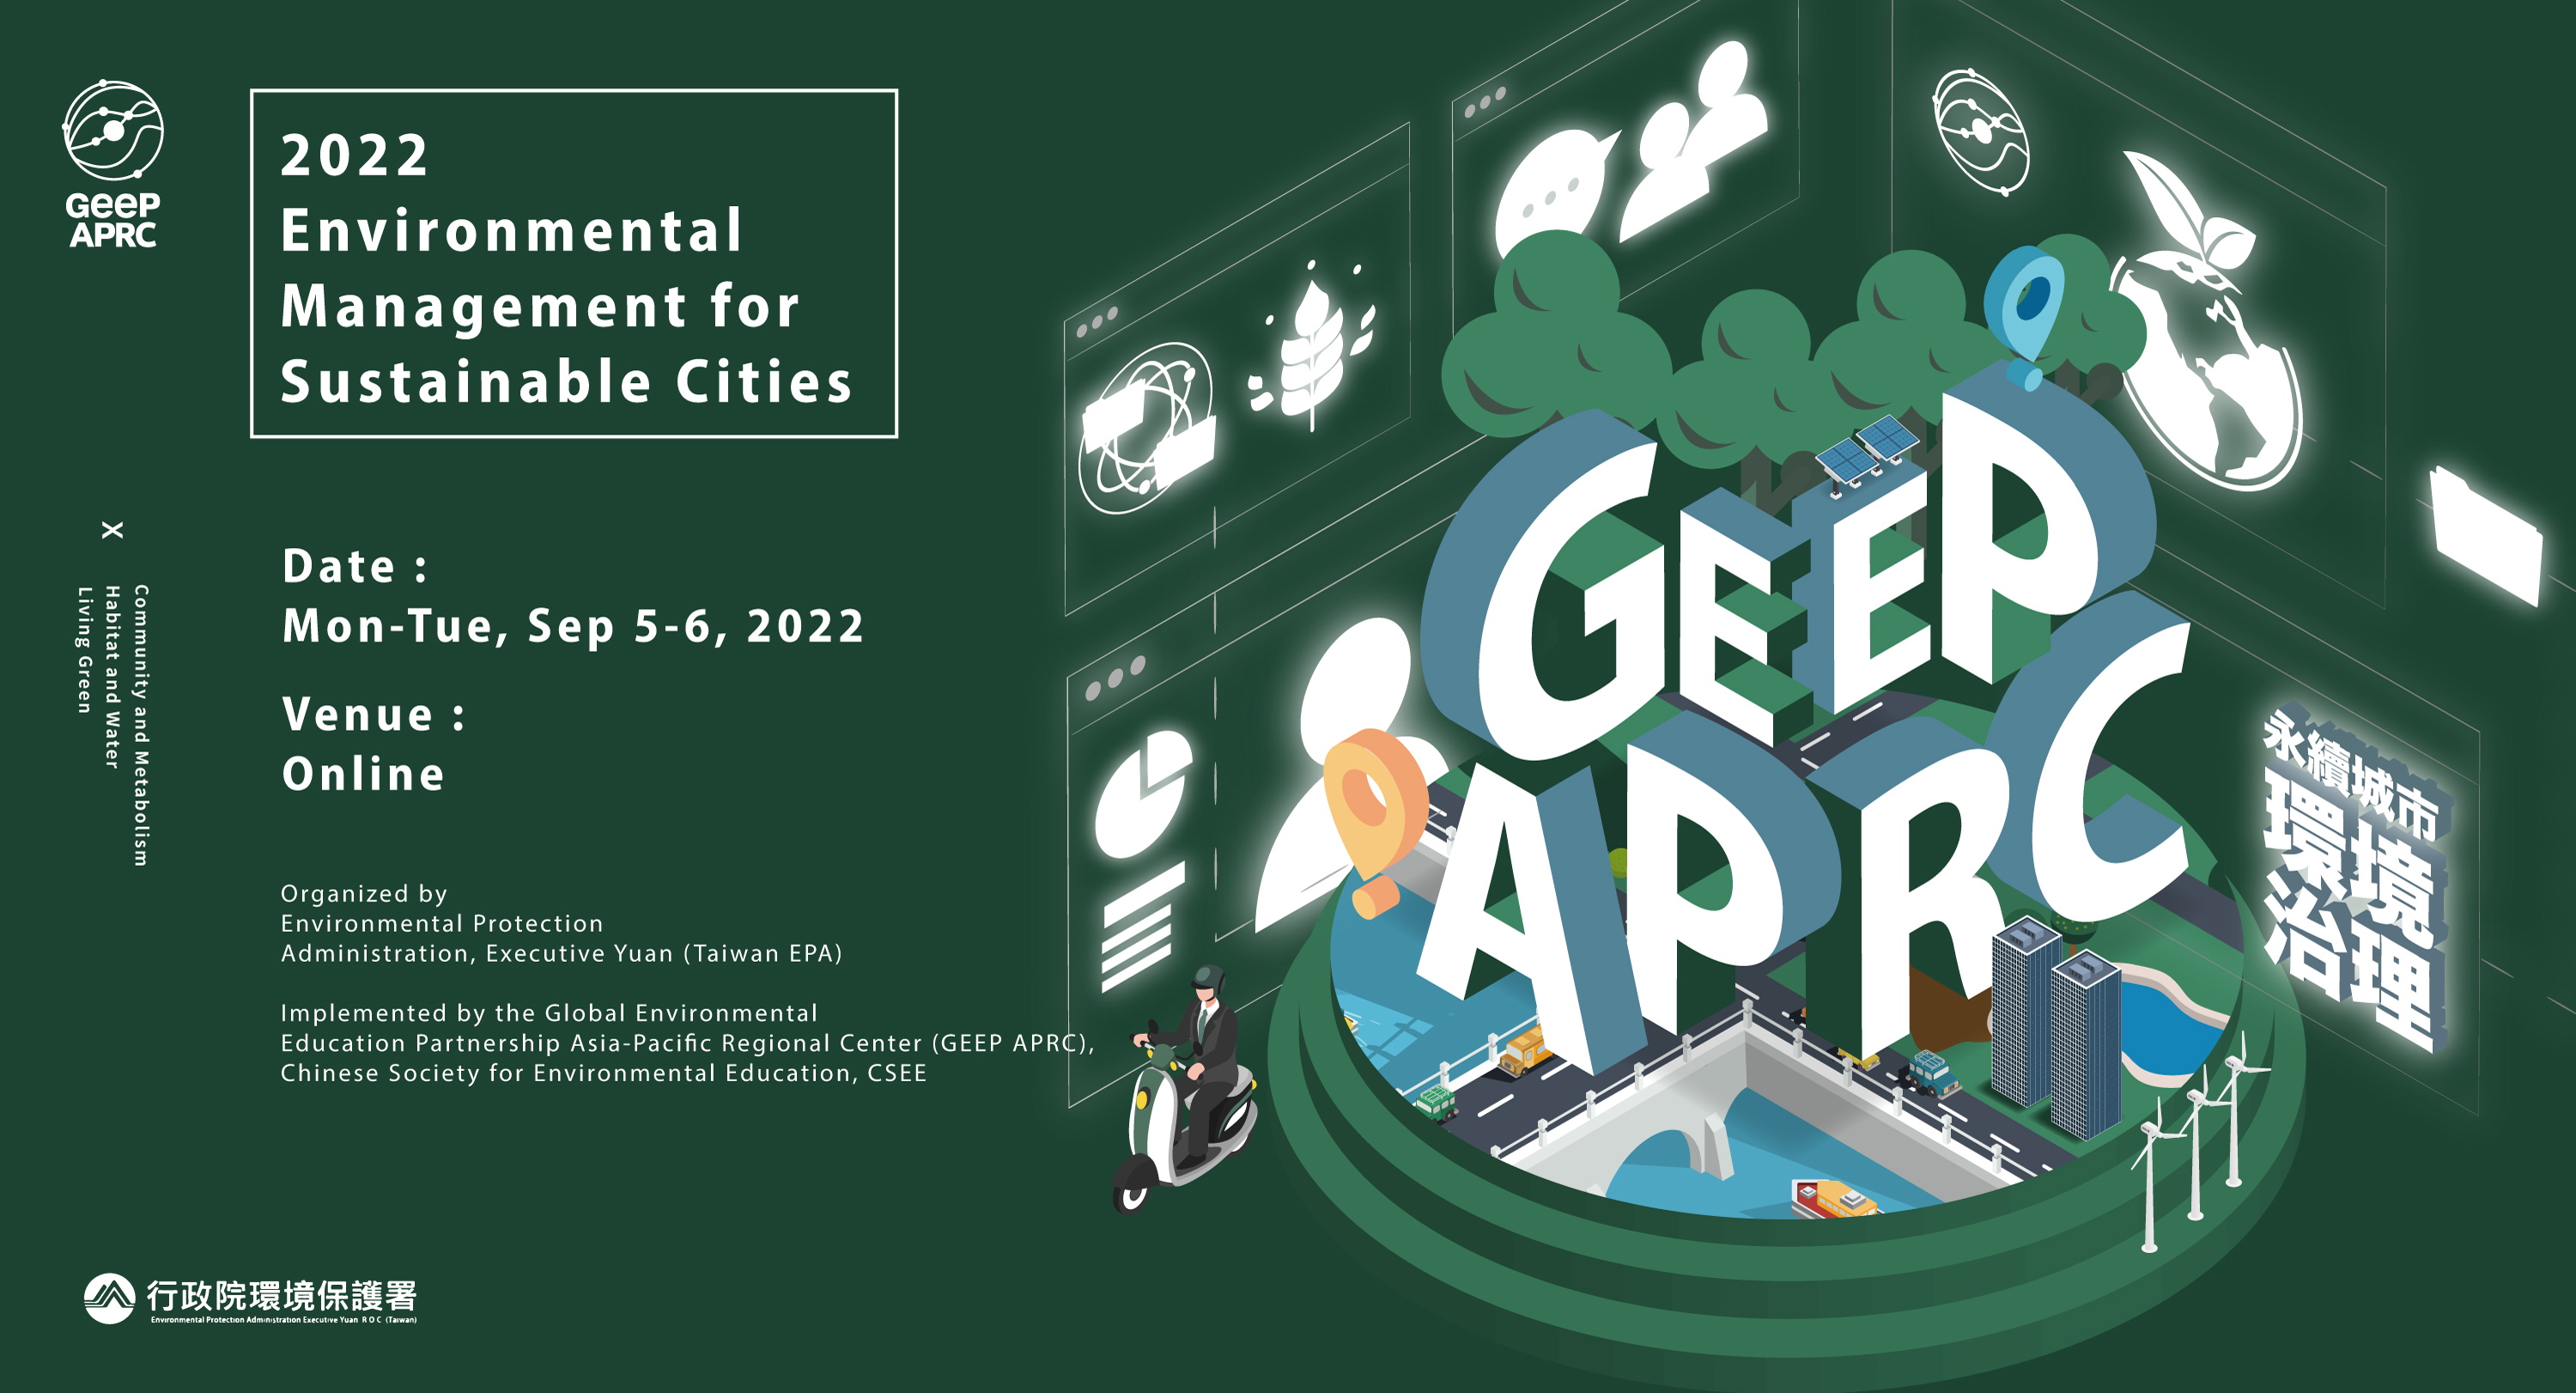 【Upcoming Event】2022 Environmental Education International Workshop - Environmental Management for Sustainable Cities Will be Held Online